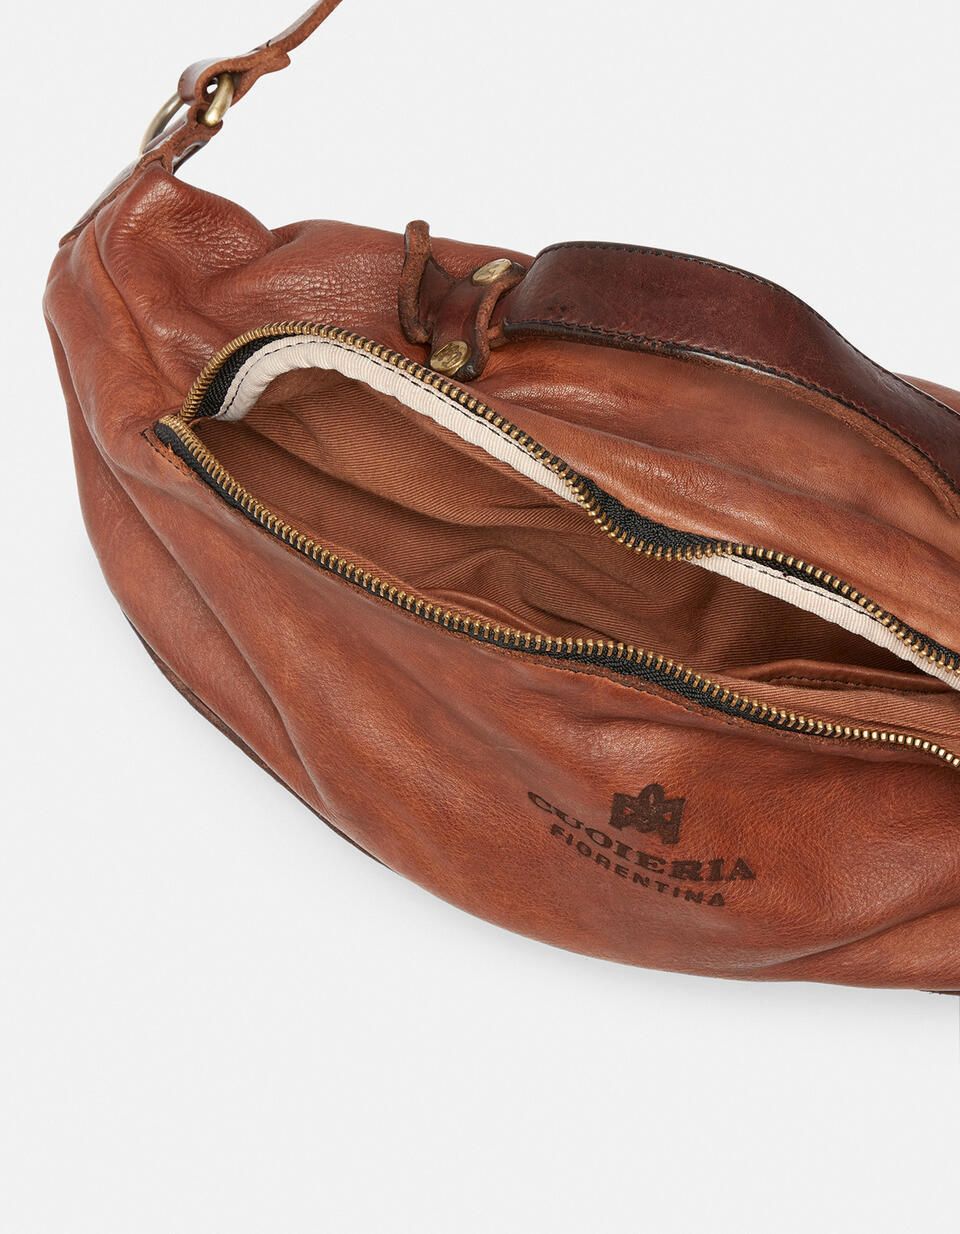 Millennial pouch in natural leather - Waist Bag - MEN'S BAGS | bags  - Waist Bag - MEN'S BAGS | bagsCuoieria Fiorentina